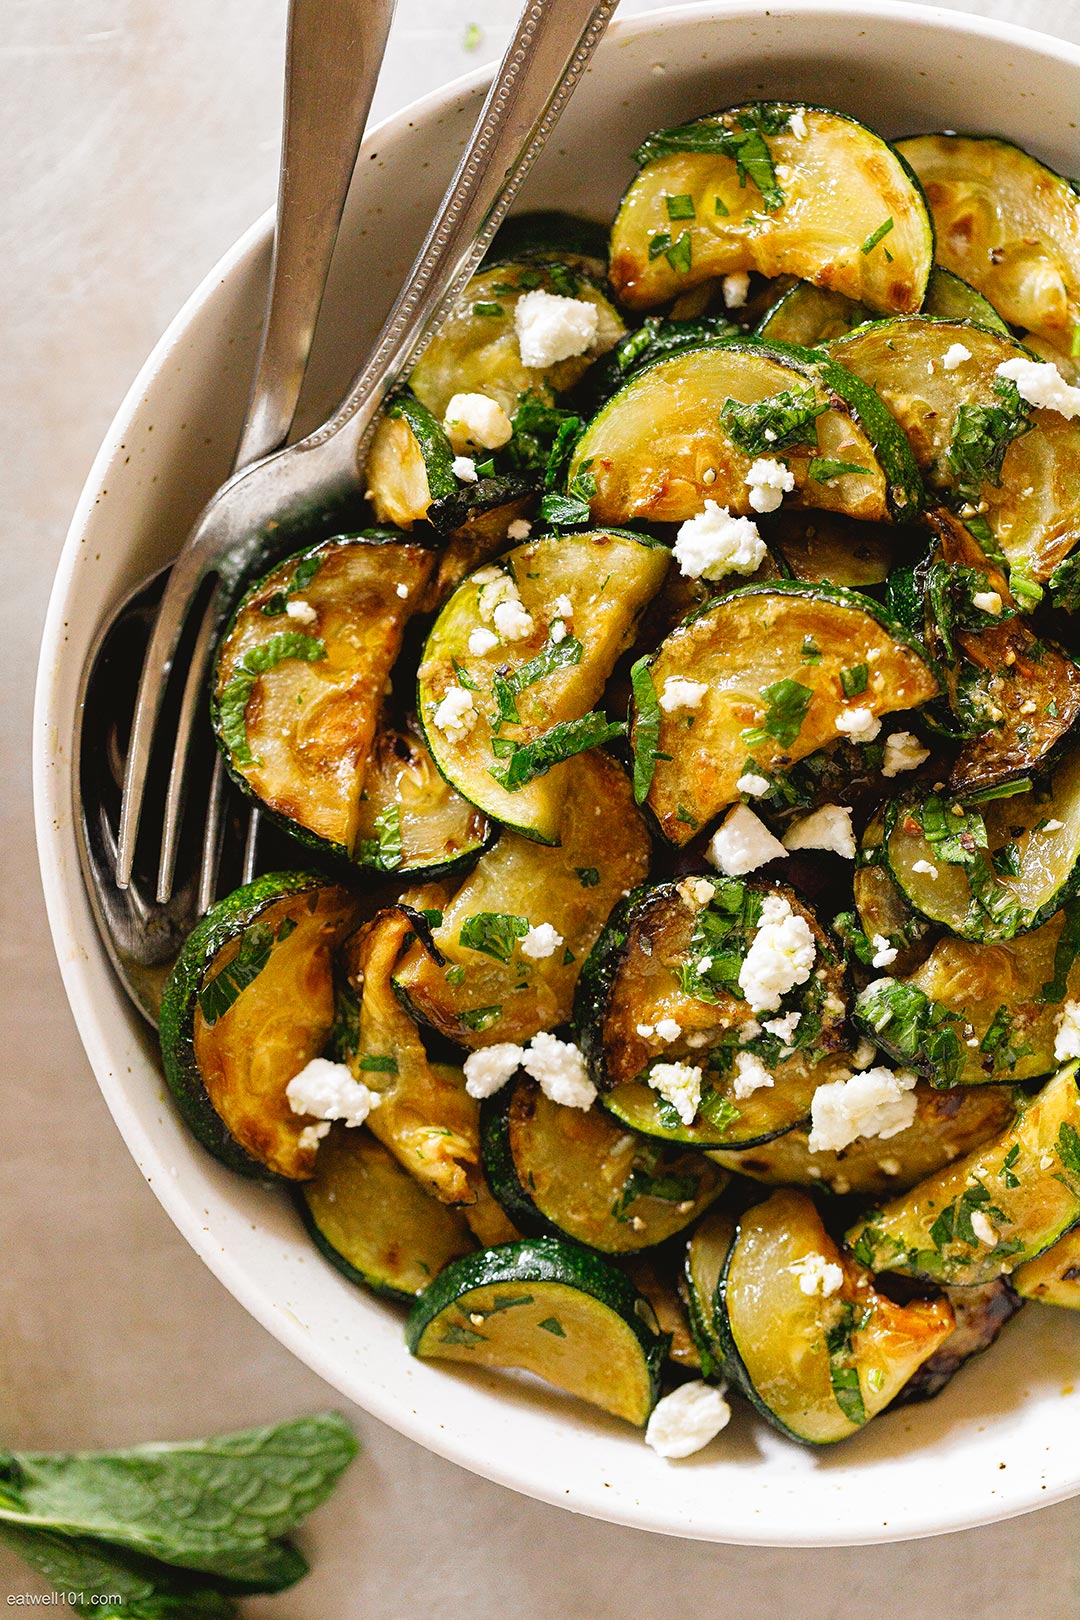 Roasted Zucchini Salad Recipe with Feta and Italian Dressing – How to